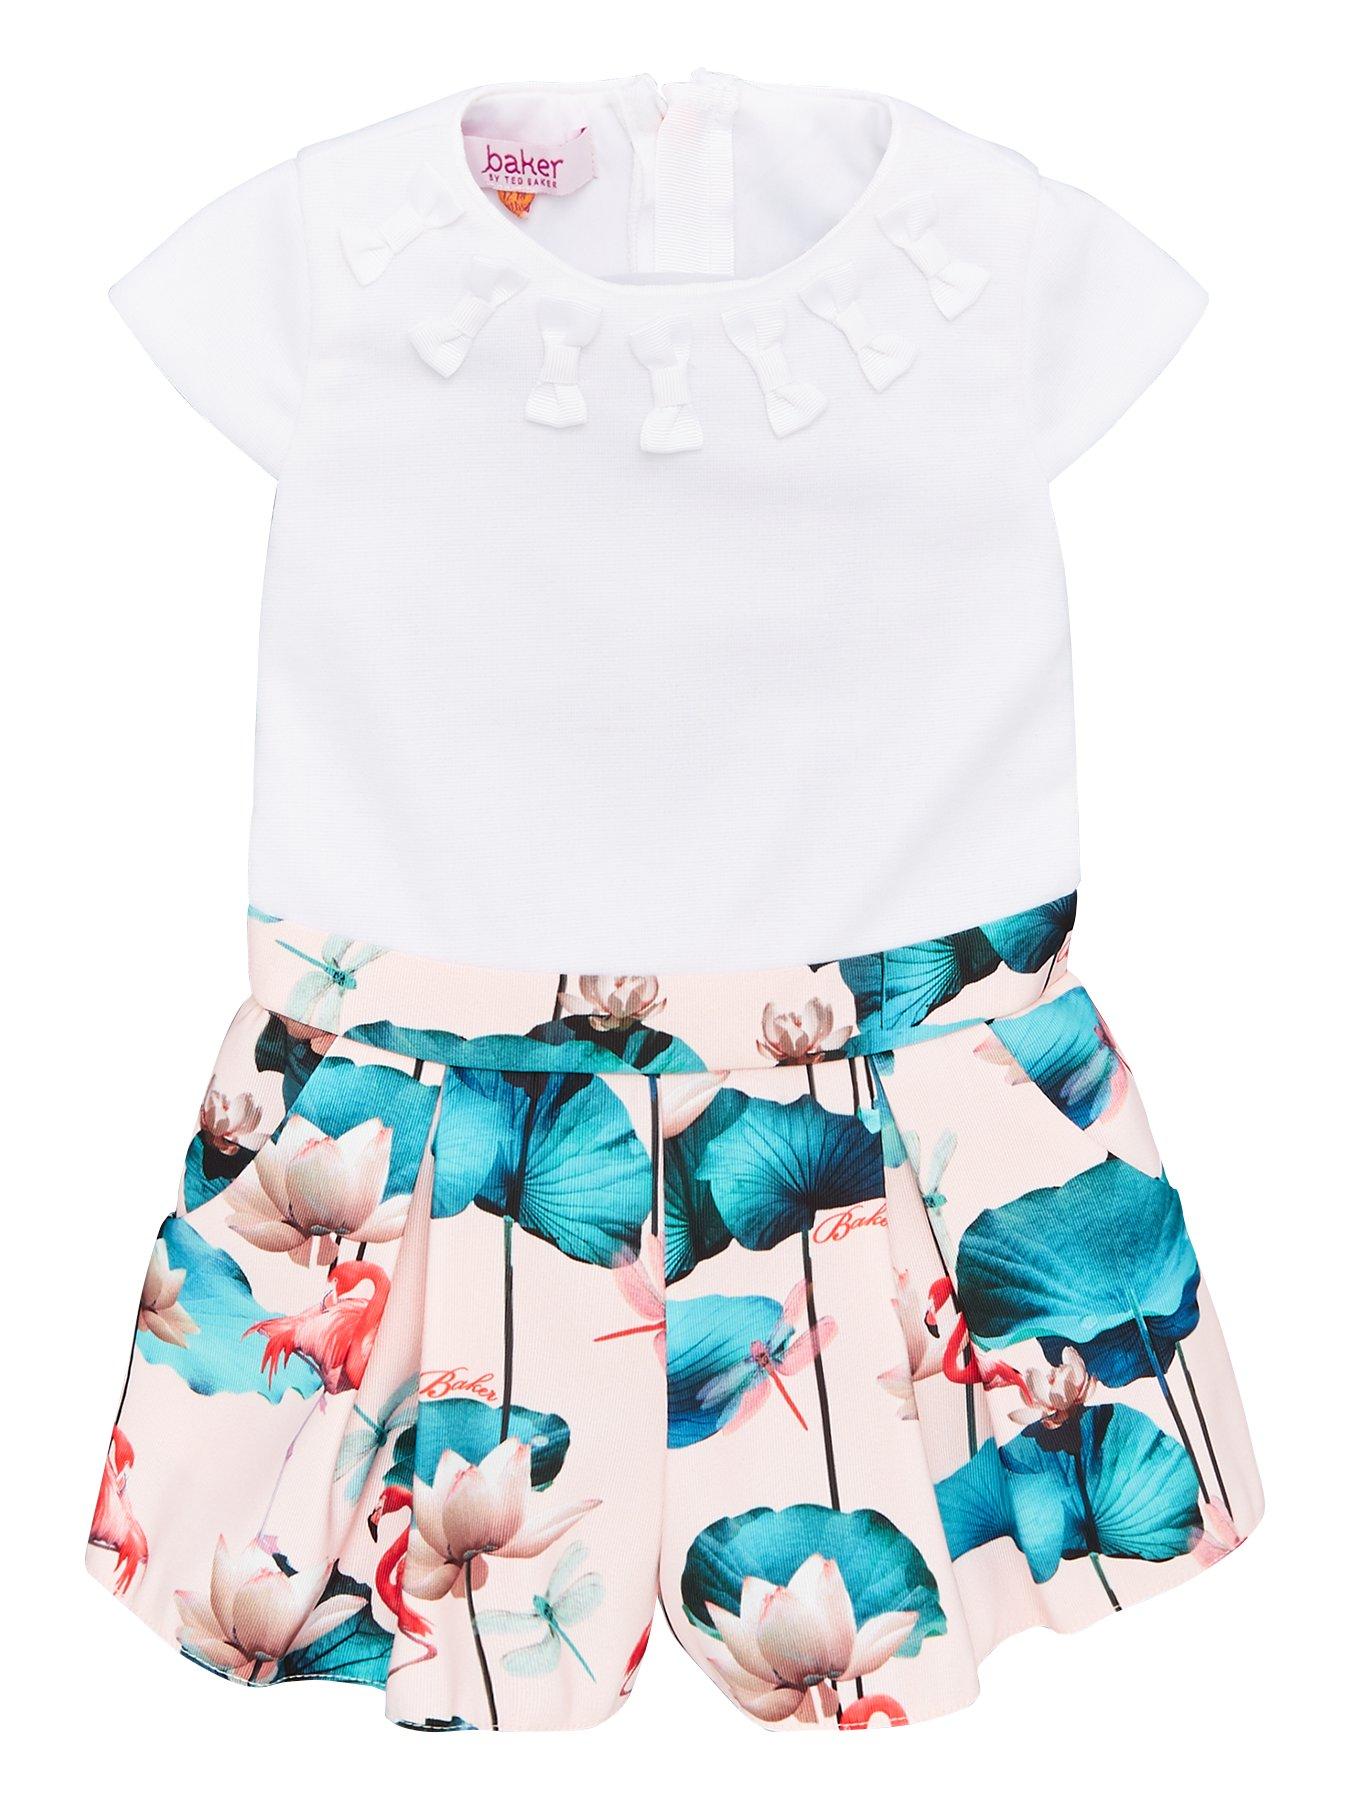 ted baker children's clothes